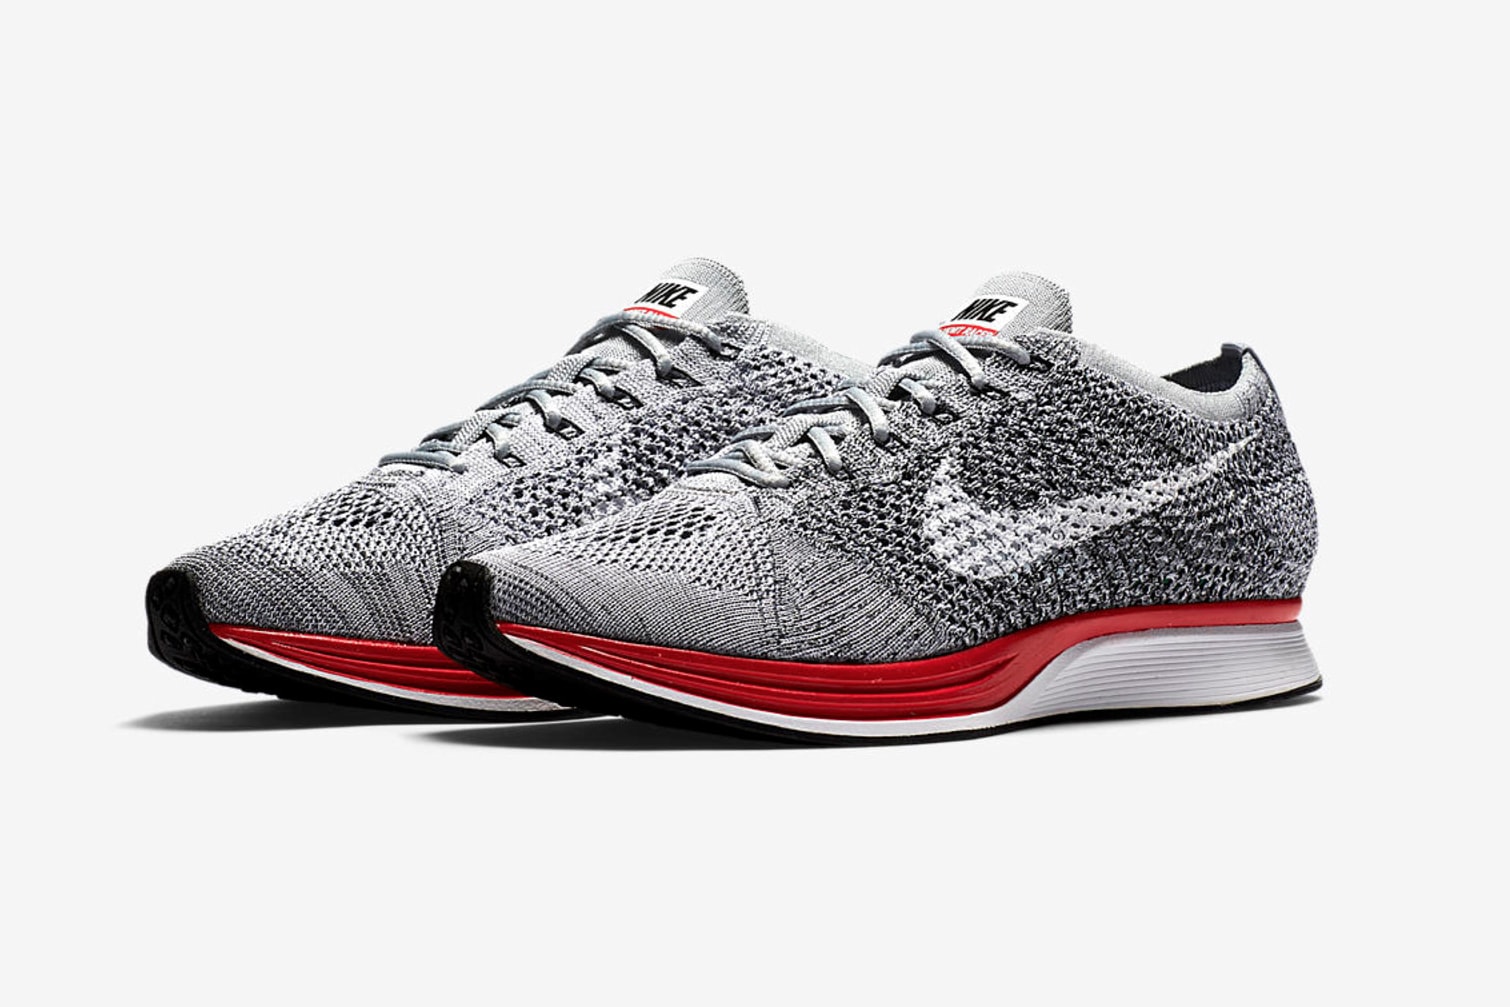 Nike Flyknit Racer "No Parking" Release Date Swoosh Wolf Grey Red Colorway